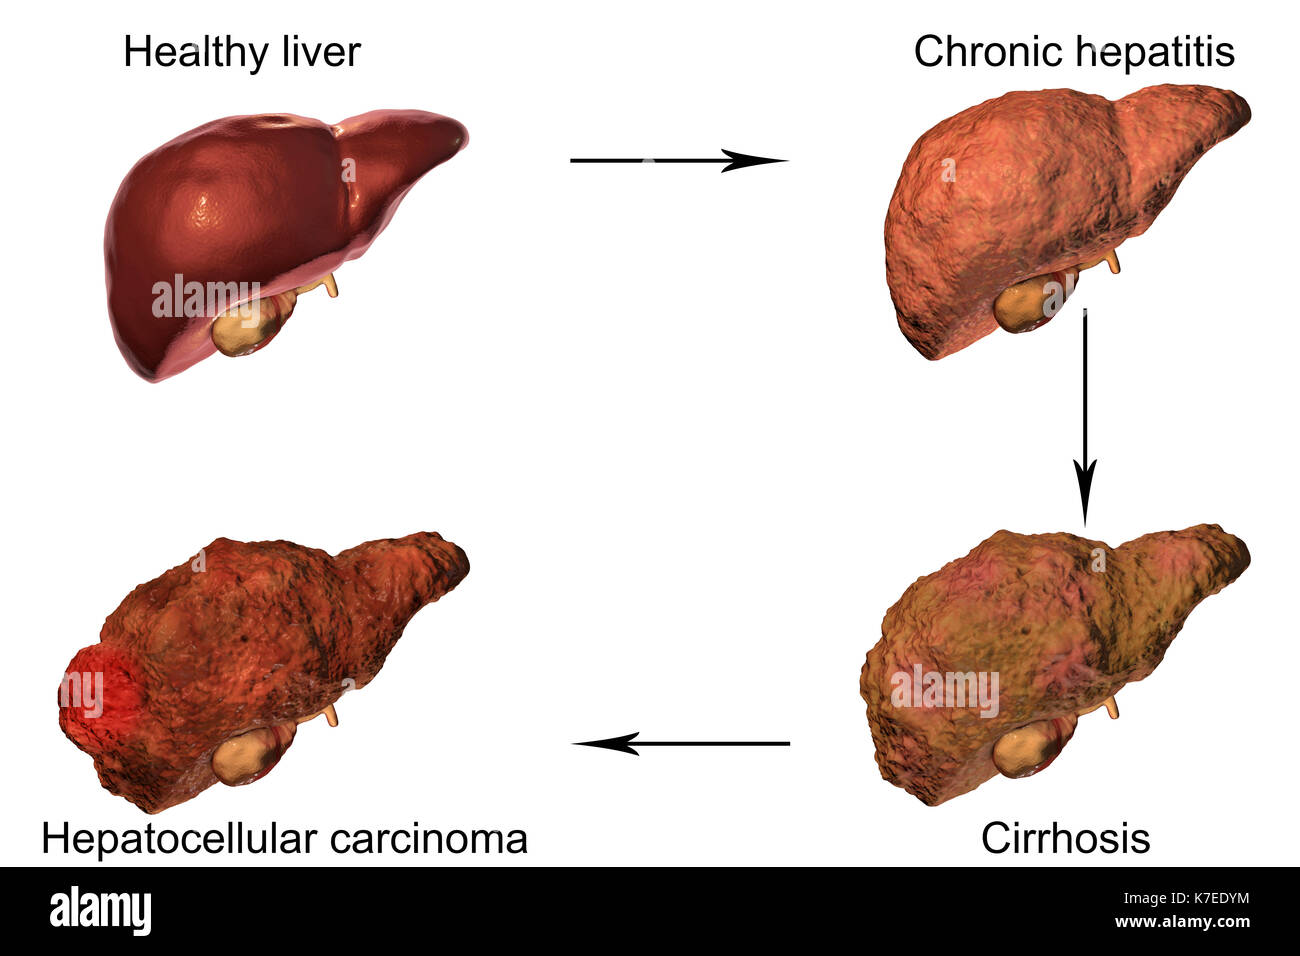 Human liver showing stages of liver disease, computer illustration. Stock Photo